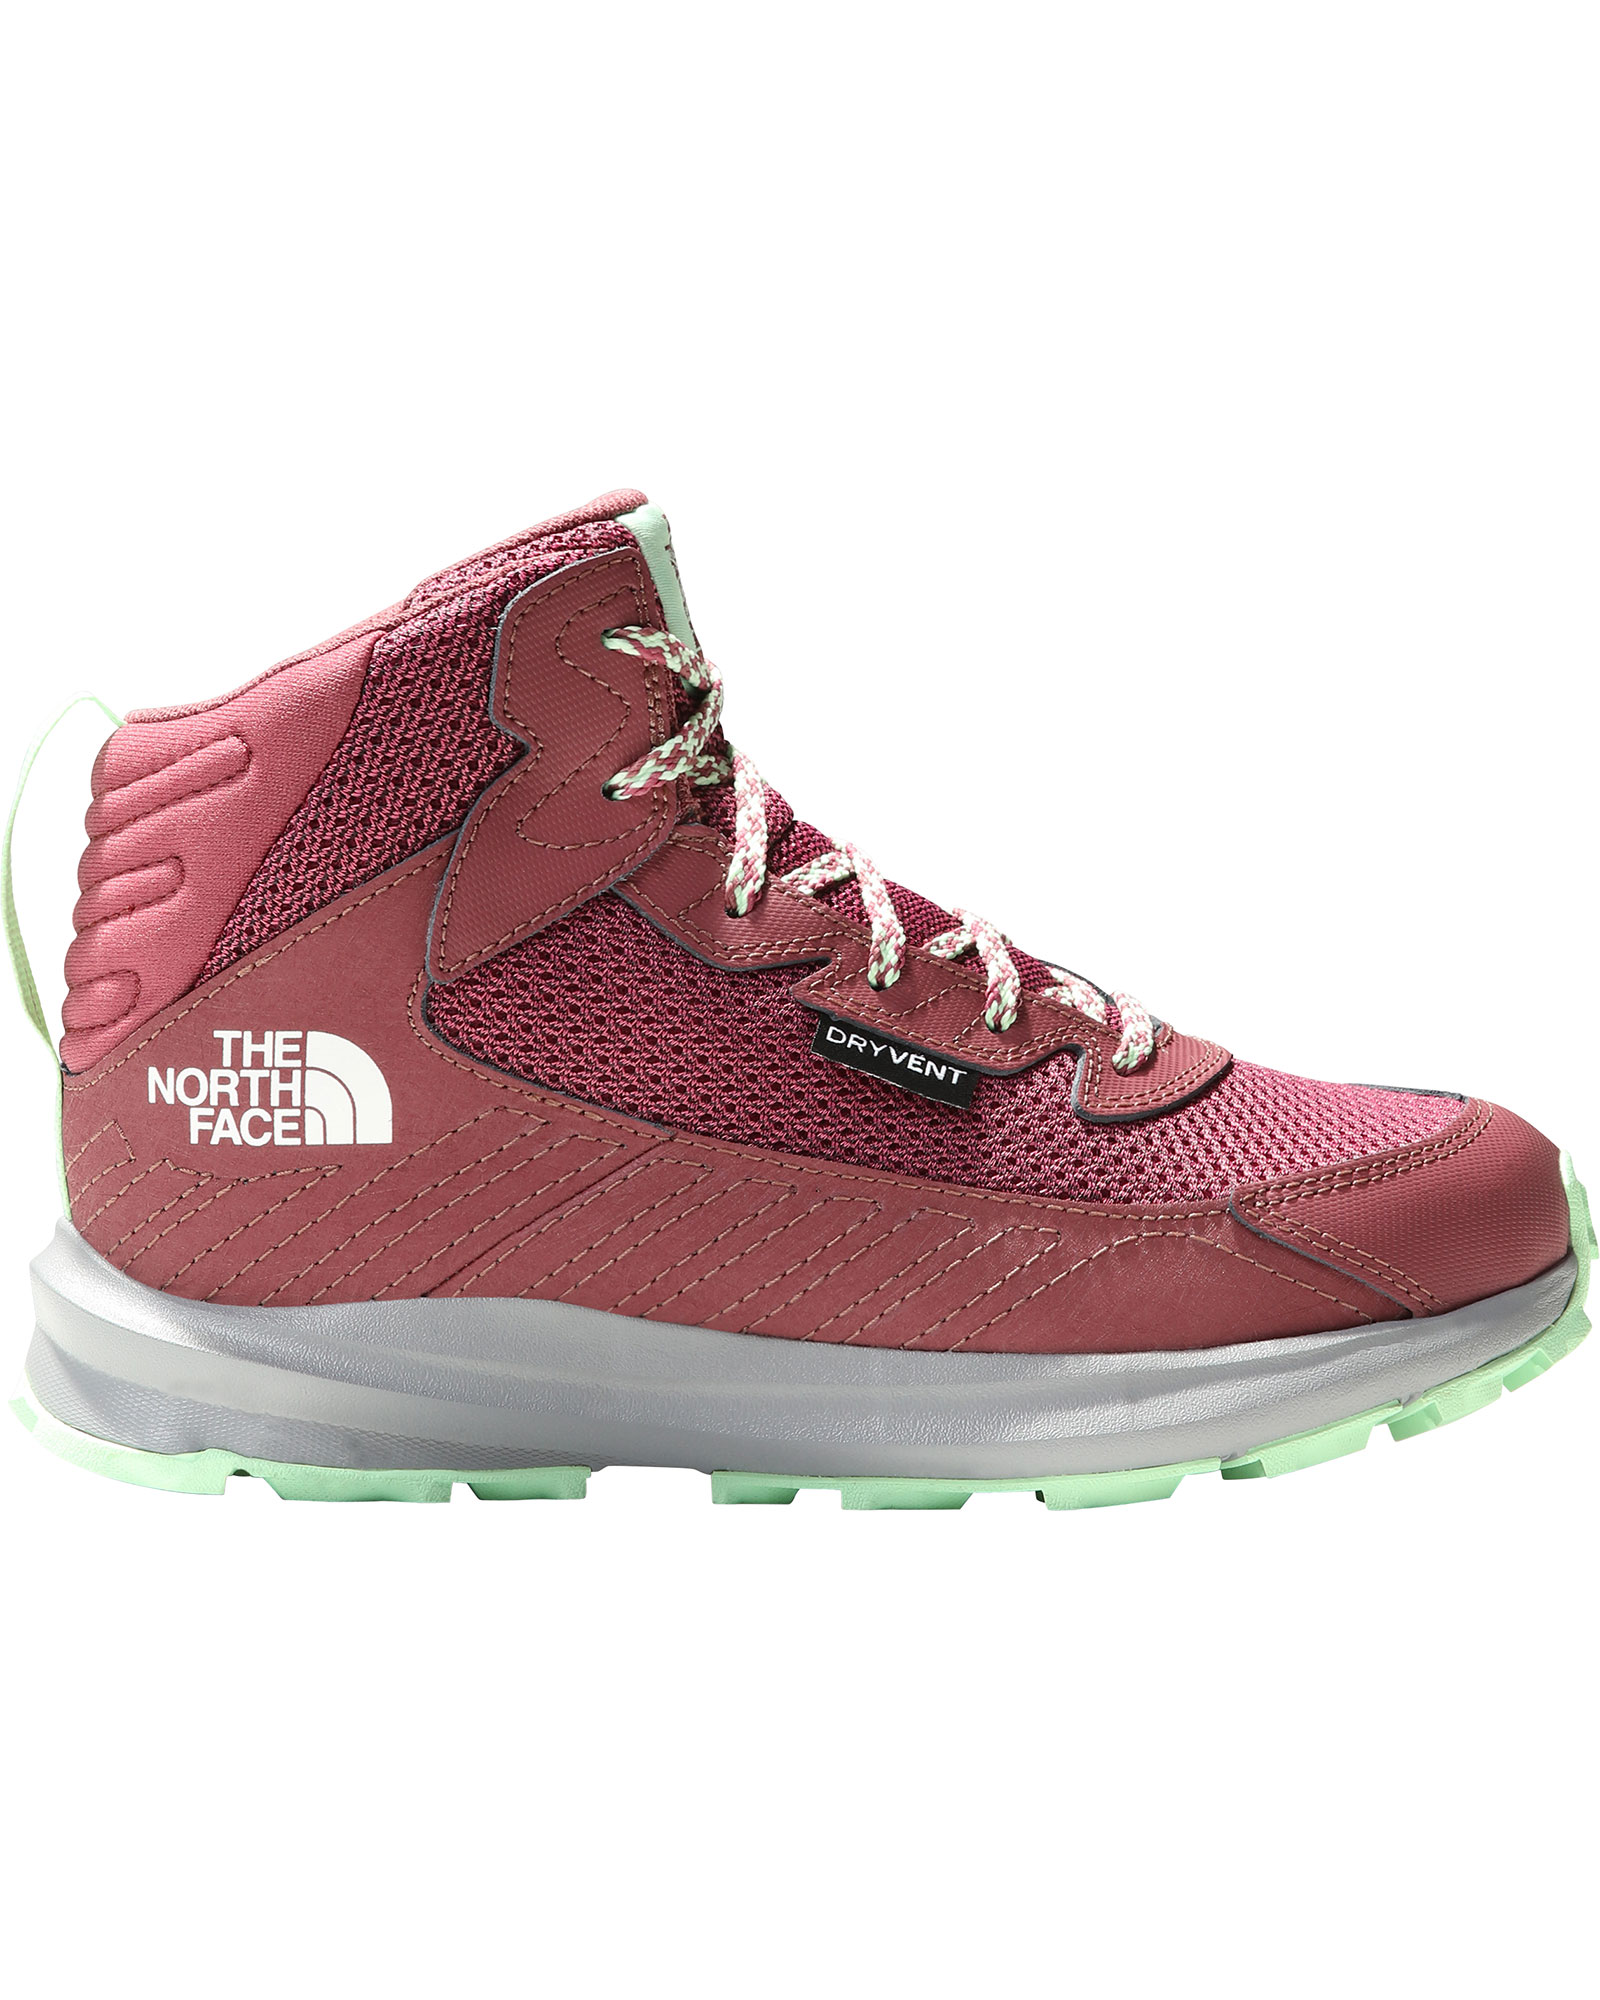 The North Face Youth Fastpack Hiker Mid Kids’ Waterproof Boots - Red Violet/Wild Ginger UK 13 INF